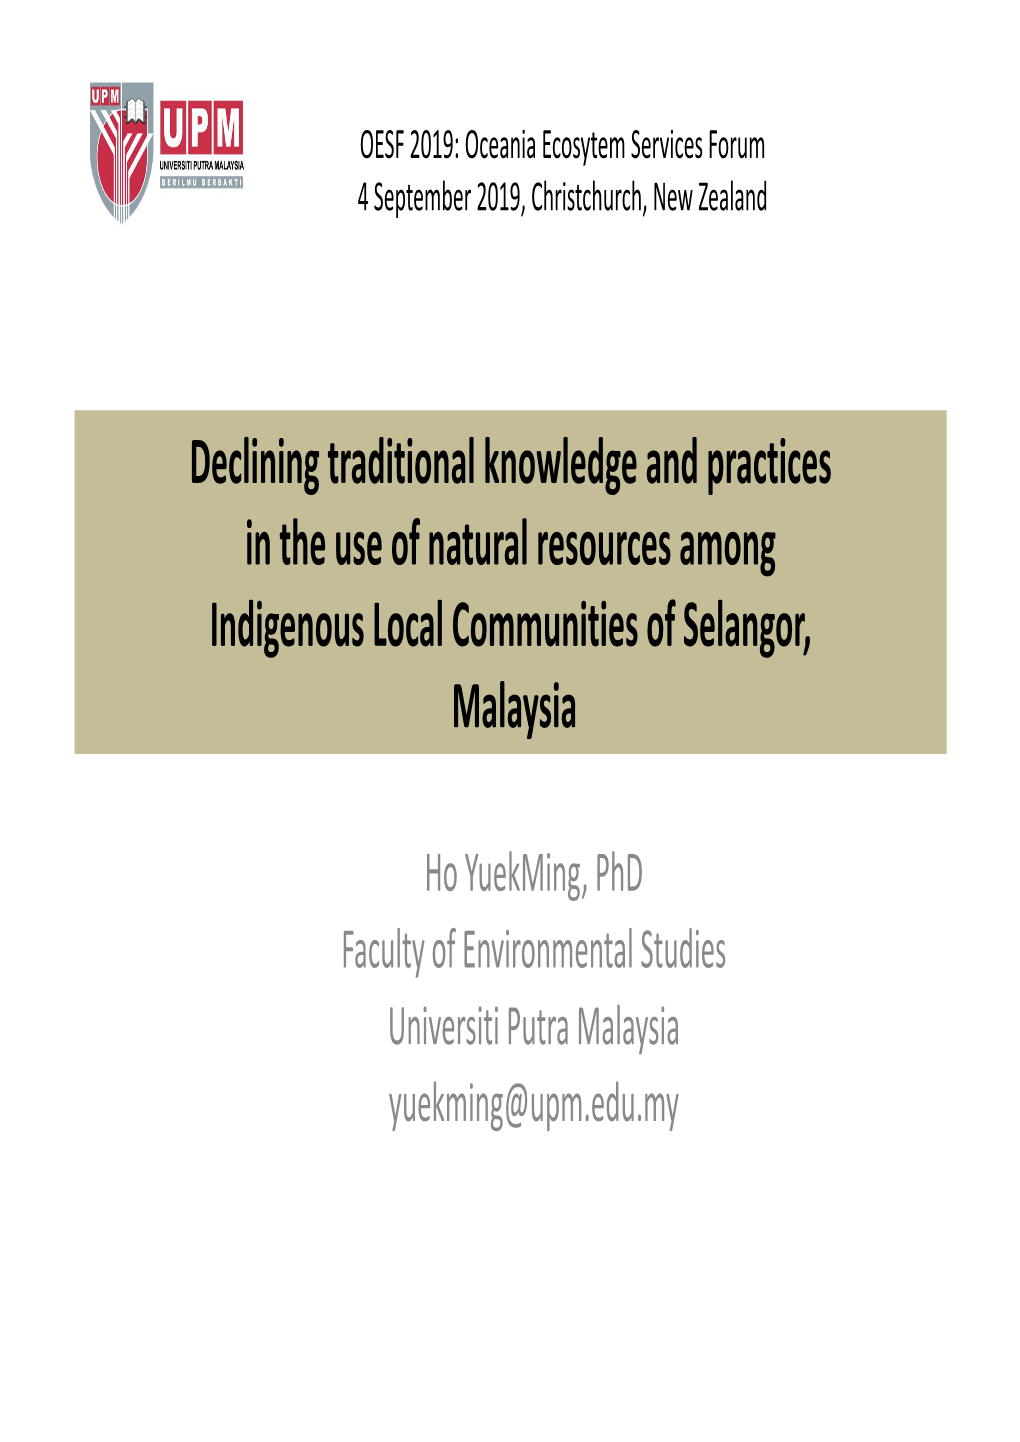 Declining Traditional Knowledge and Practices in the Use of Natural Resources Among Indigenous Local Communities of Selangor, Malaysia